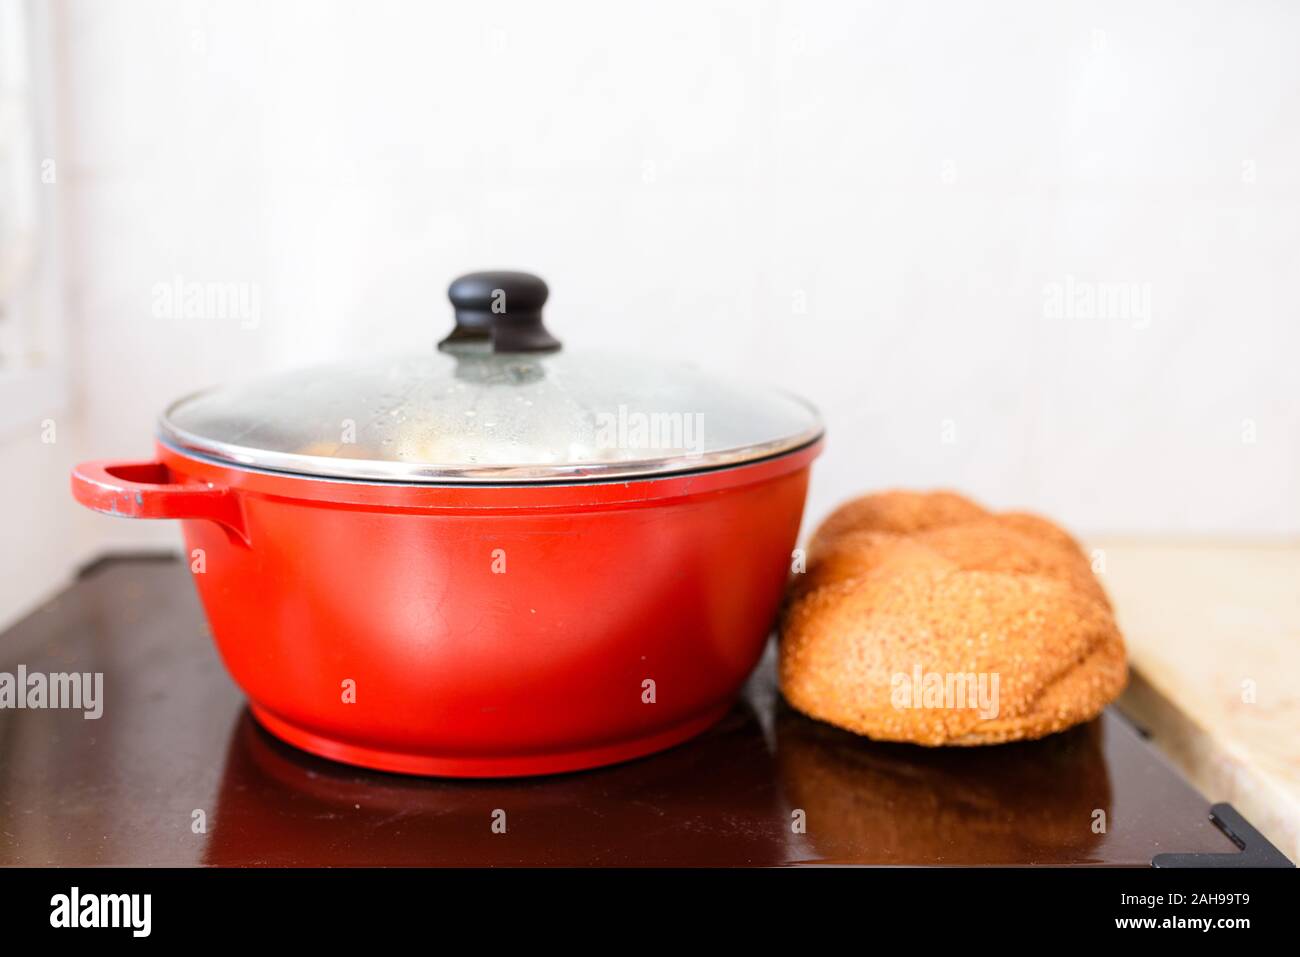 https://c8.alamy.com/comp/2AH99T9/hot-plate-for-the-sabbath-pot-with-traditional-food-and-challah-special-bread-in-jewish-cuisine-traditional-food-jewish-shabbat-2AH99T9.jpg